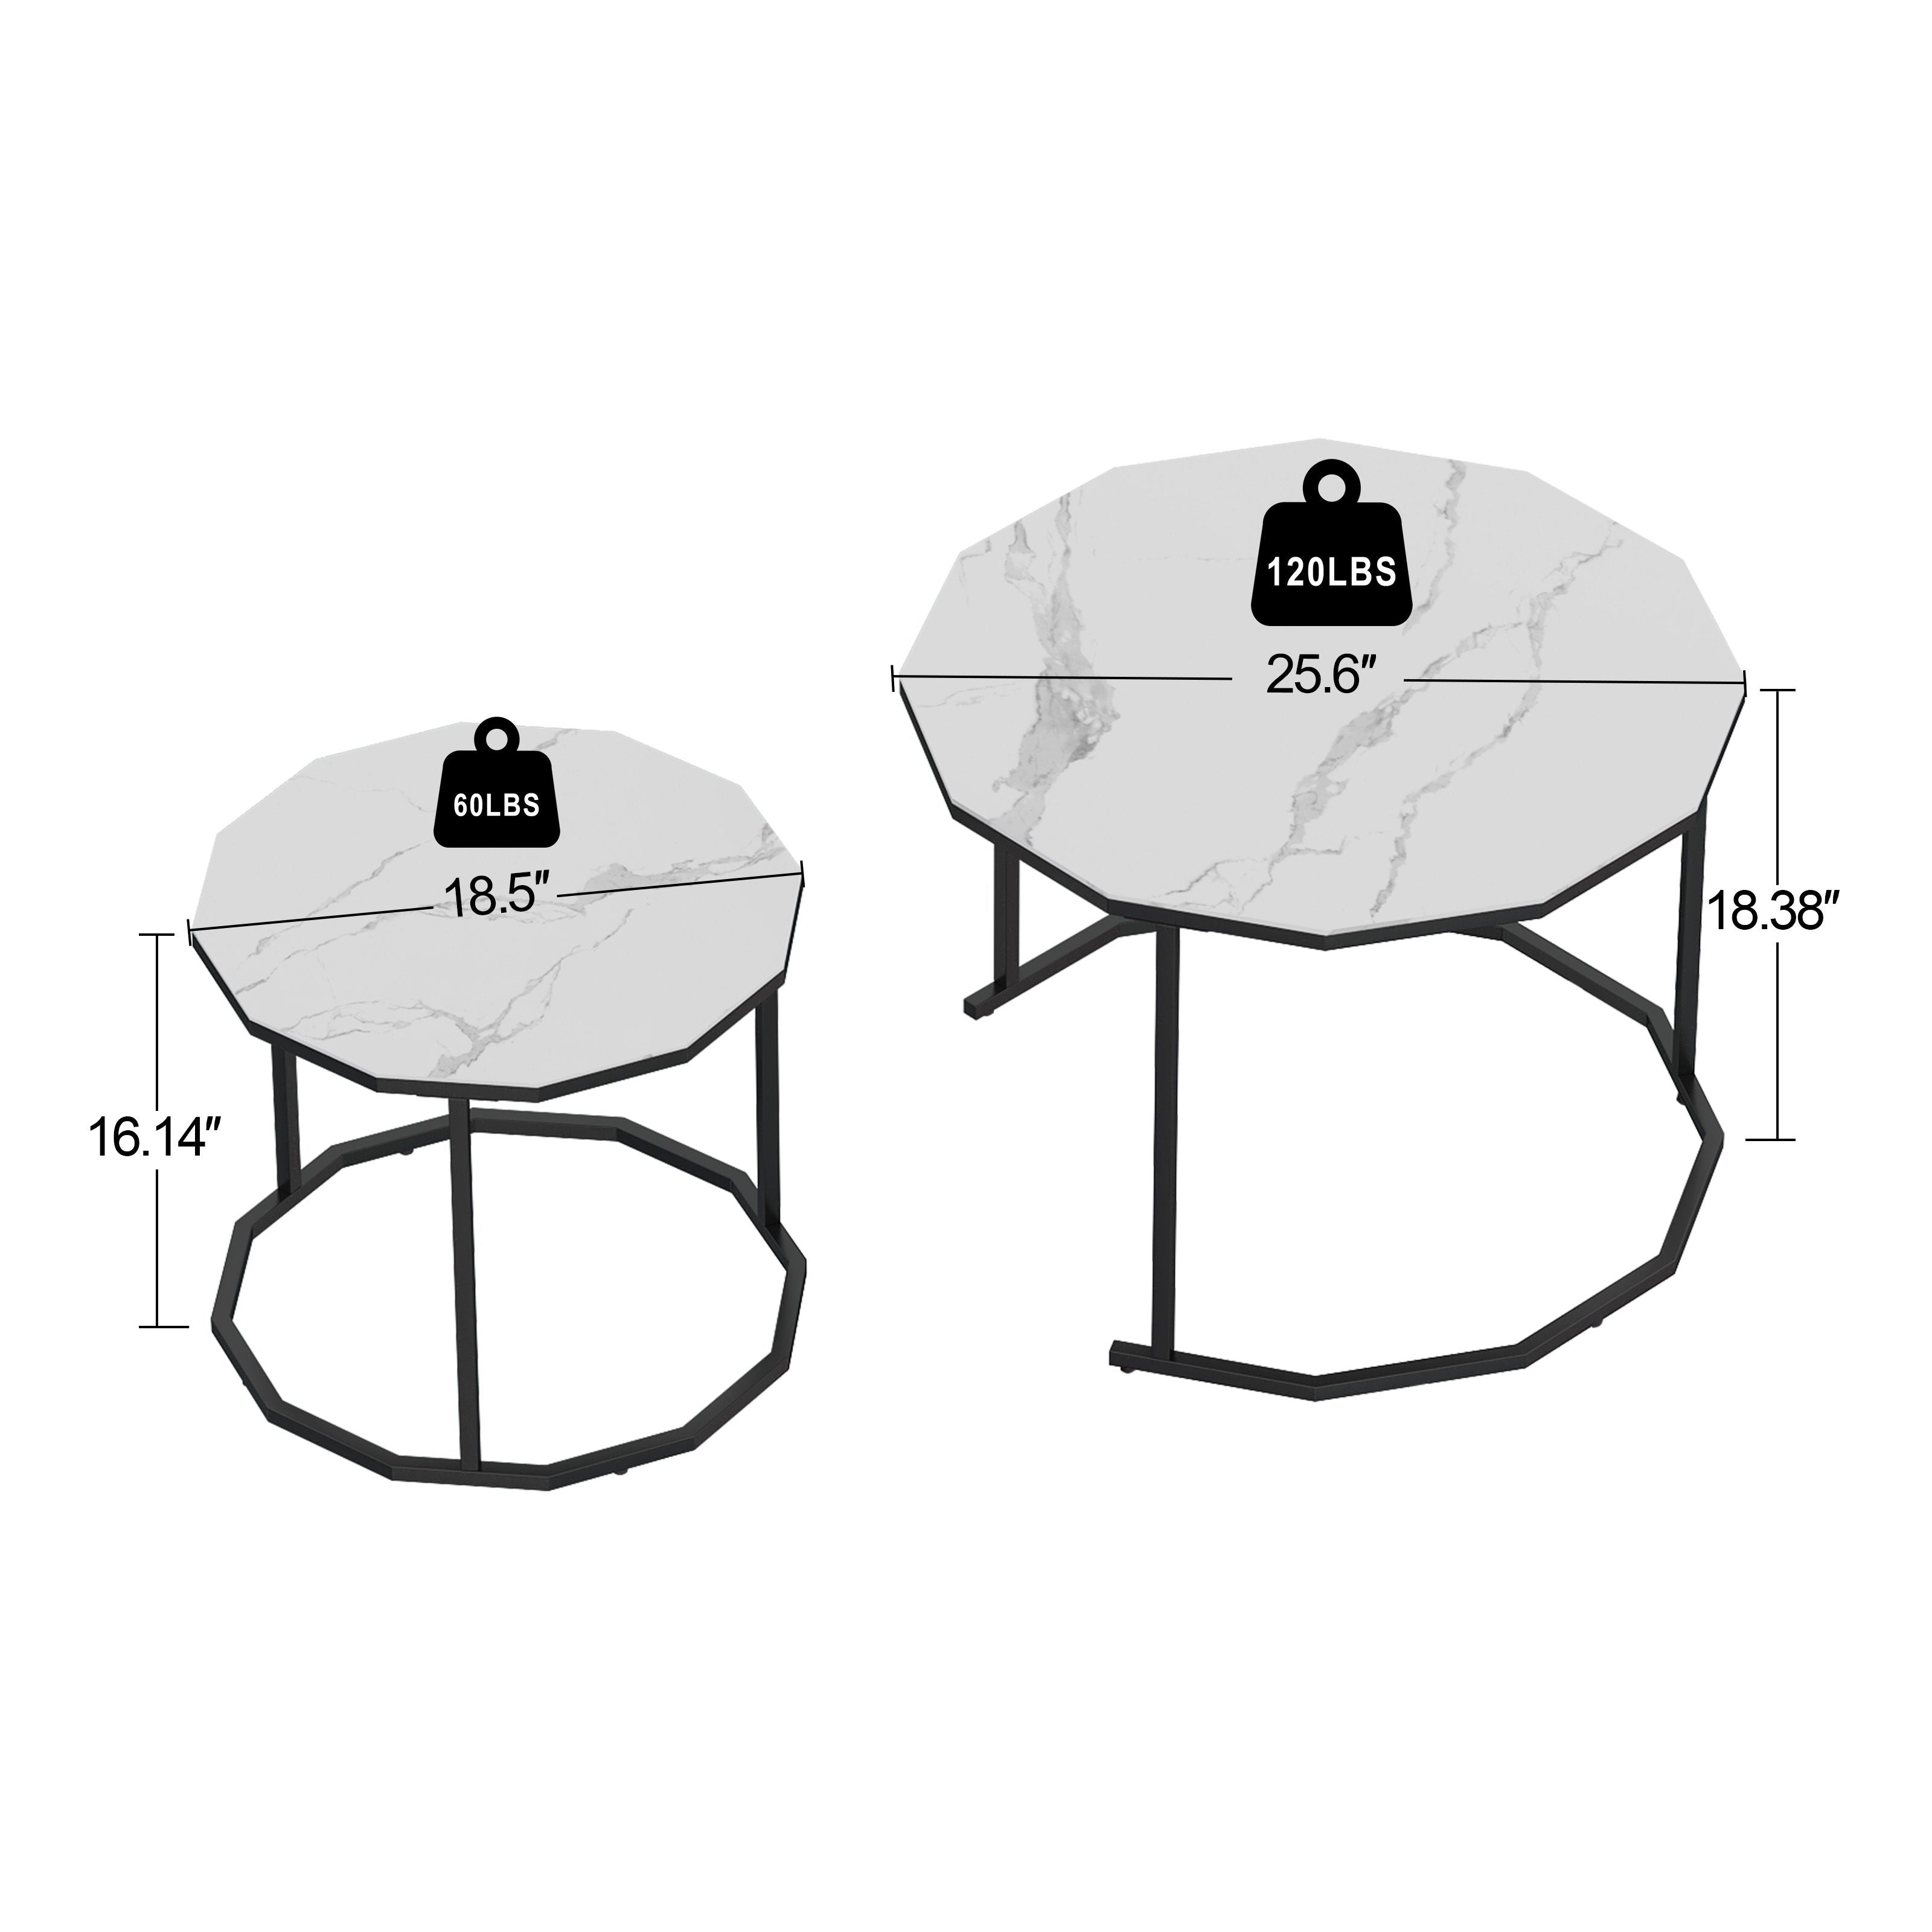 Marble Coffee Table End Table 12 - Gon Shape, 25.6 " White Artificial Marble Top And Black Metal Legs Can Be Used In, Outdoor, Anti - Tip (White And Black, 25.6"W X 25.6"D X 18 4"H)